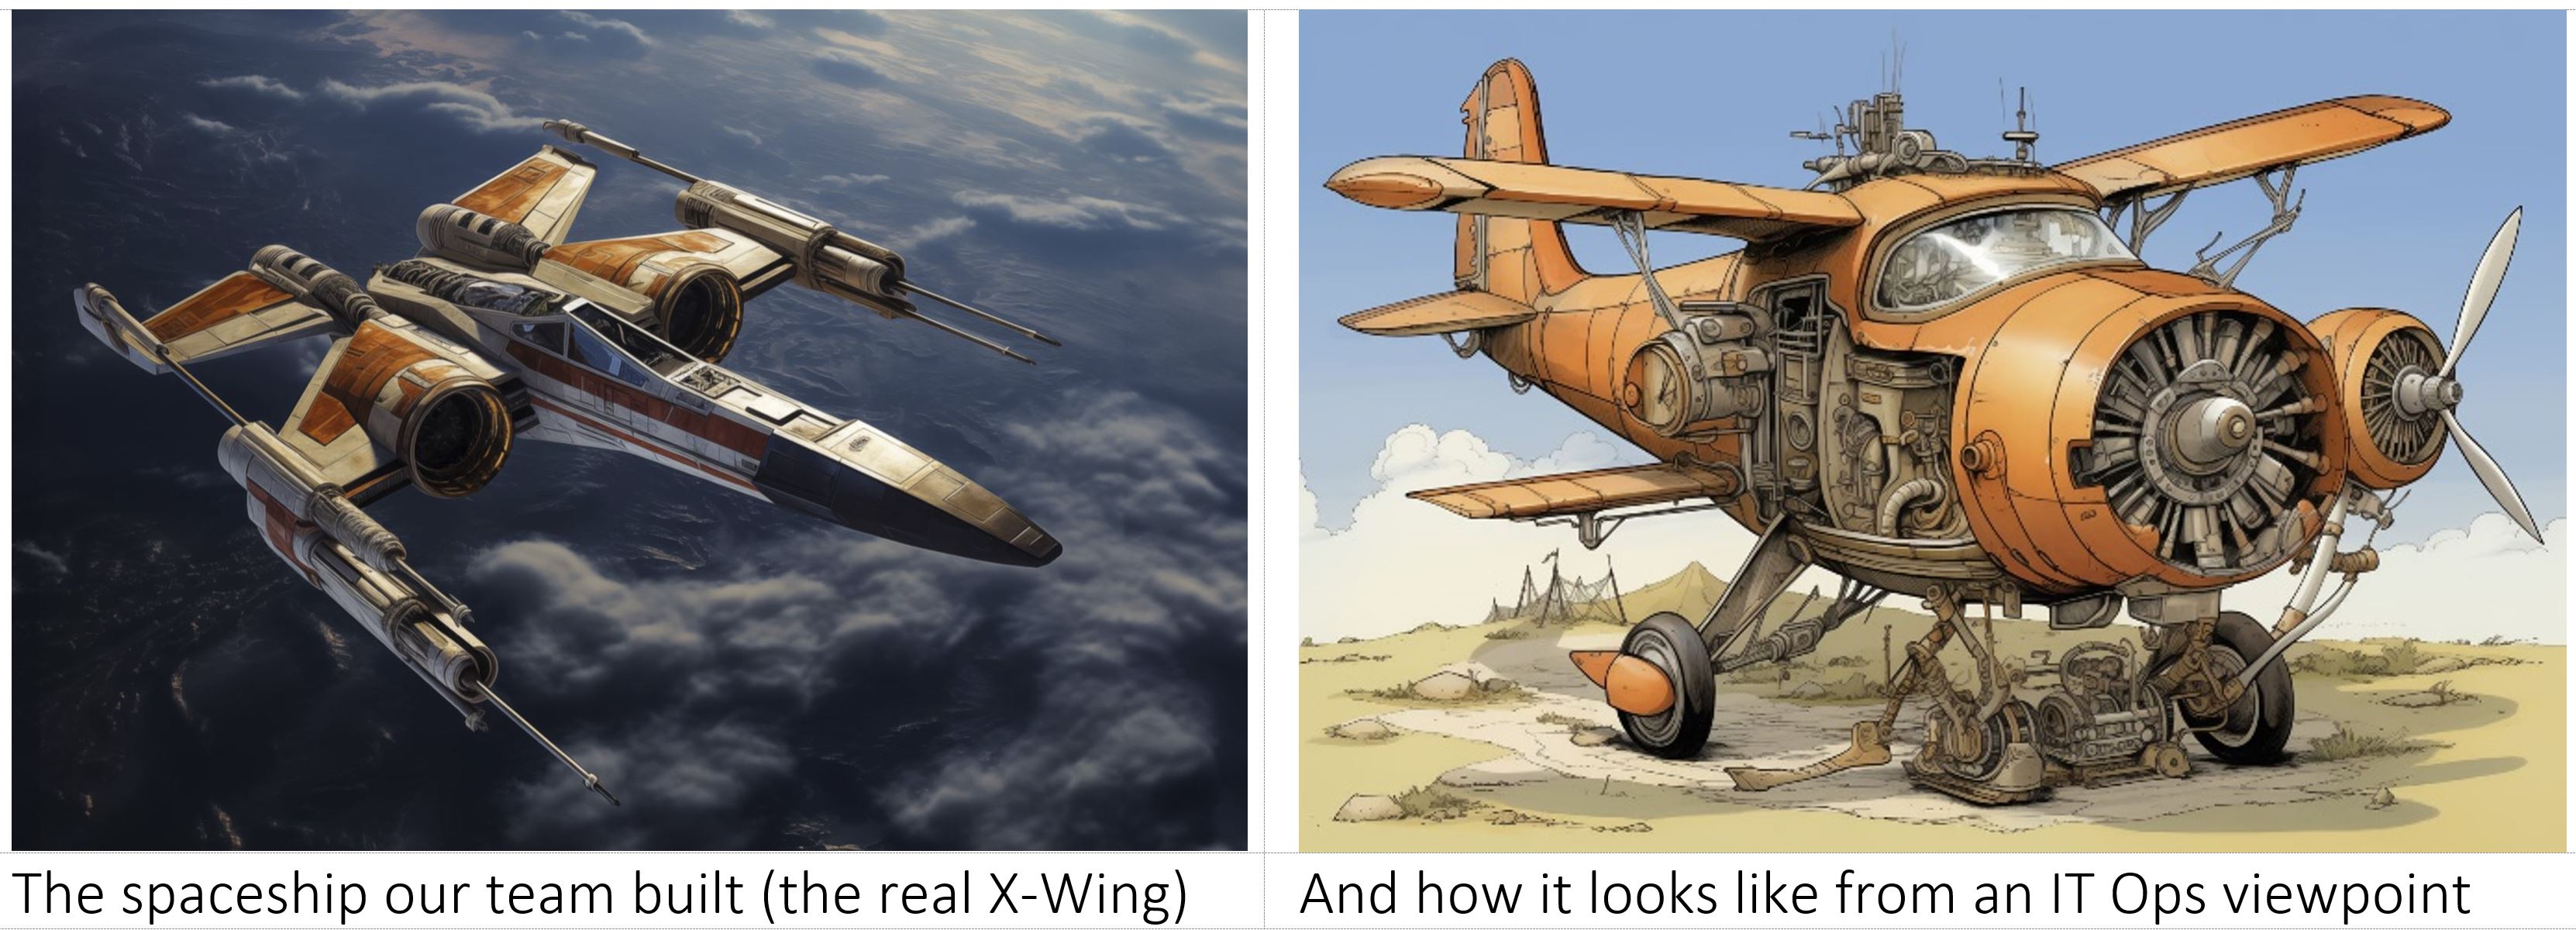 the_real_x_wing_fighter_and_how_it_looks.JPG